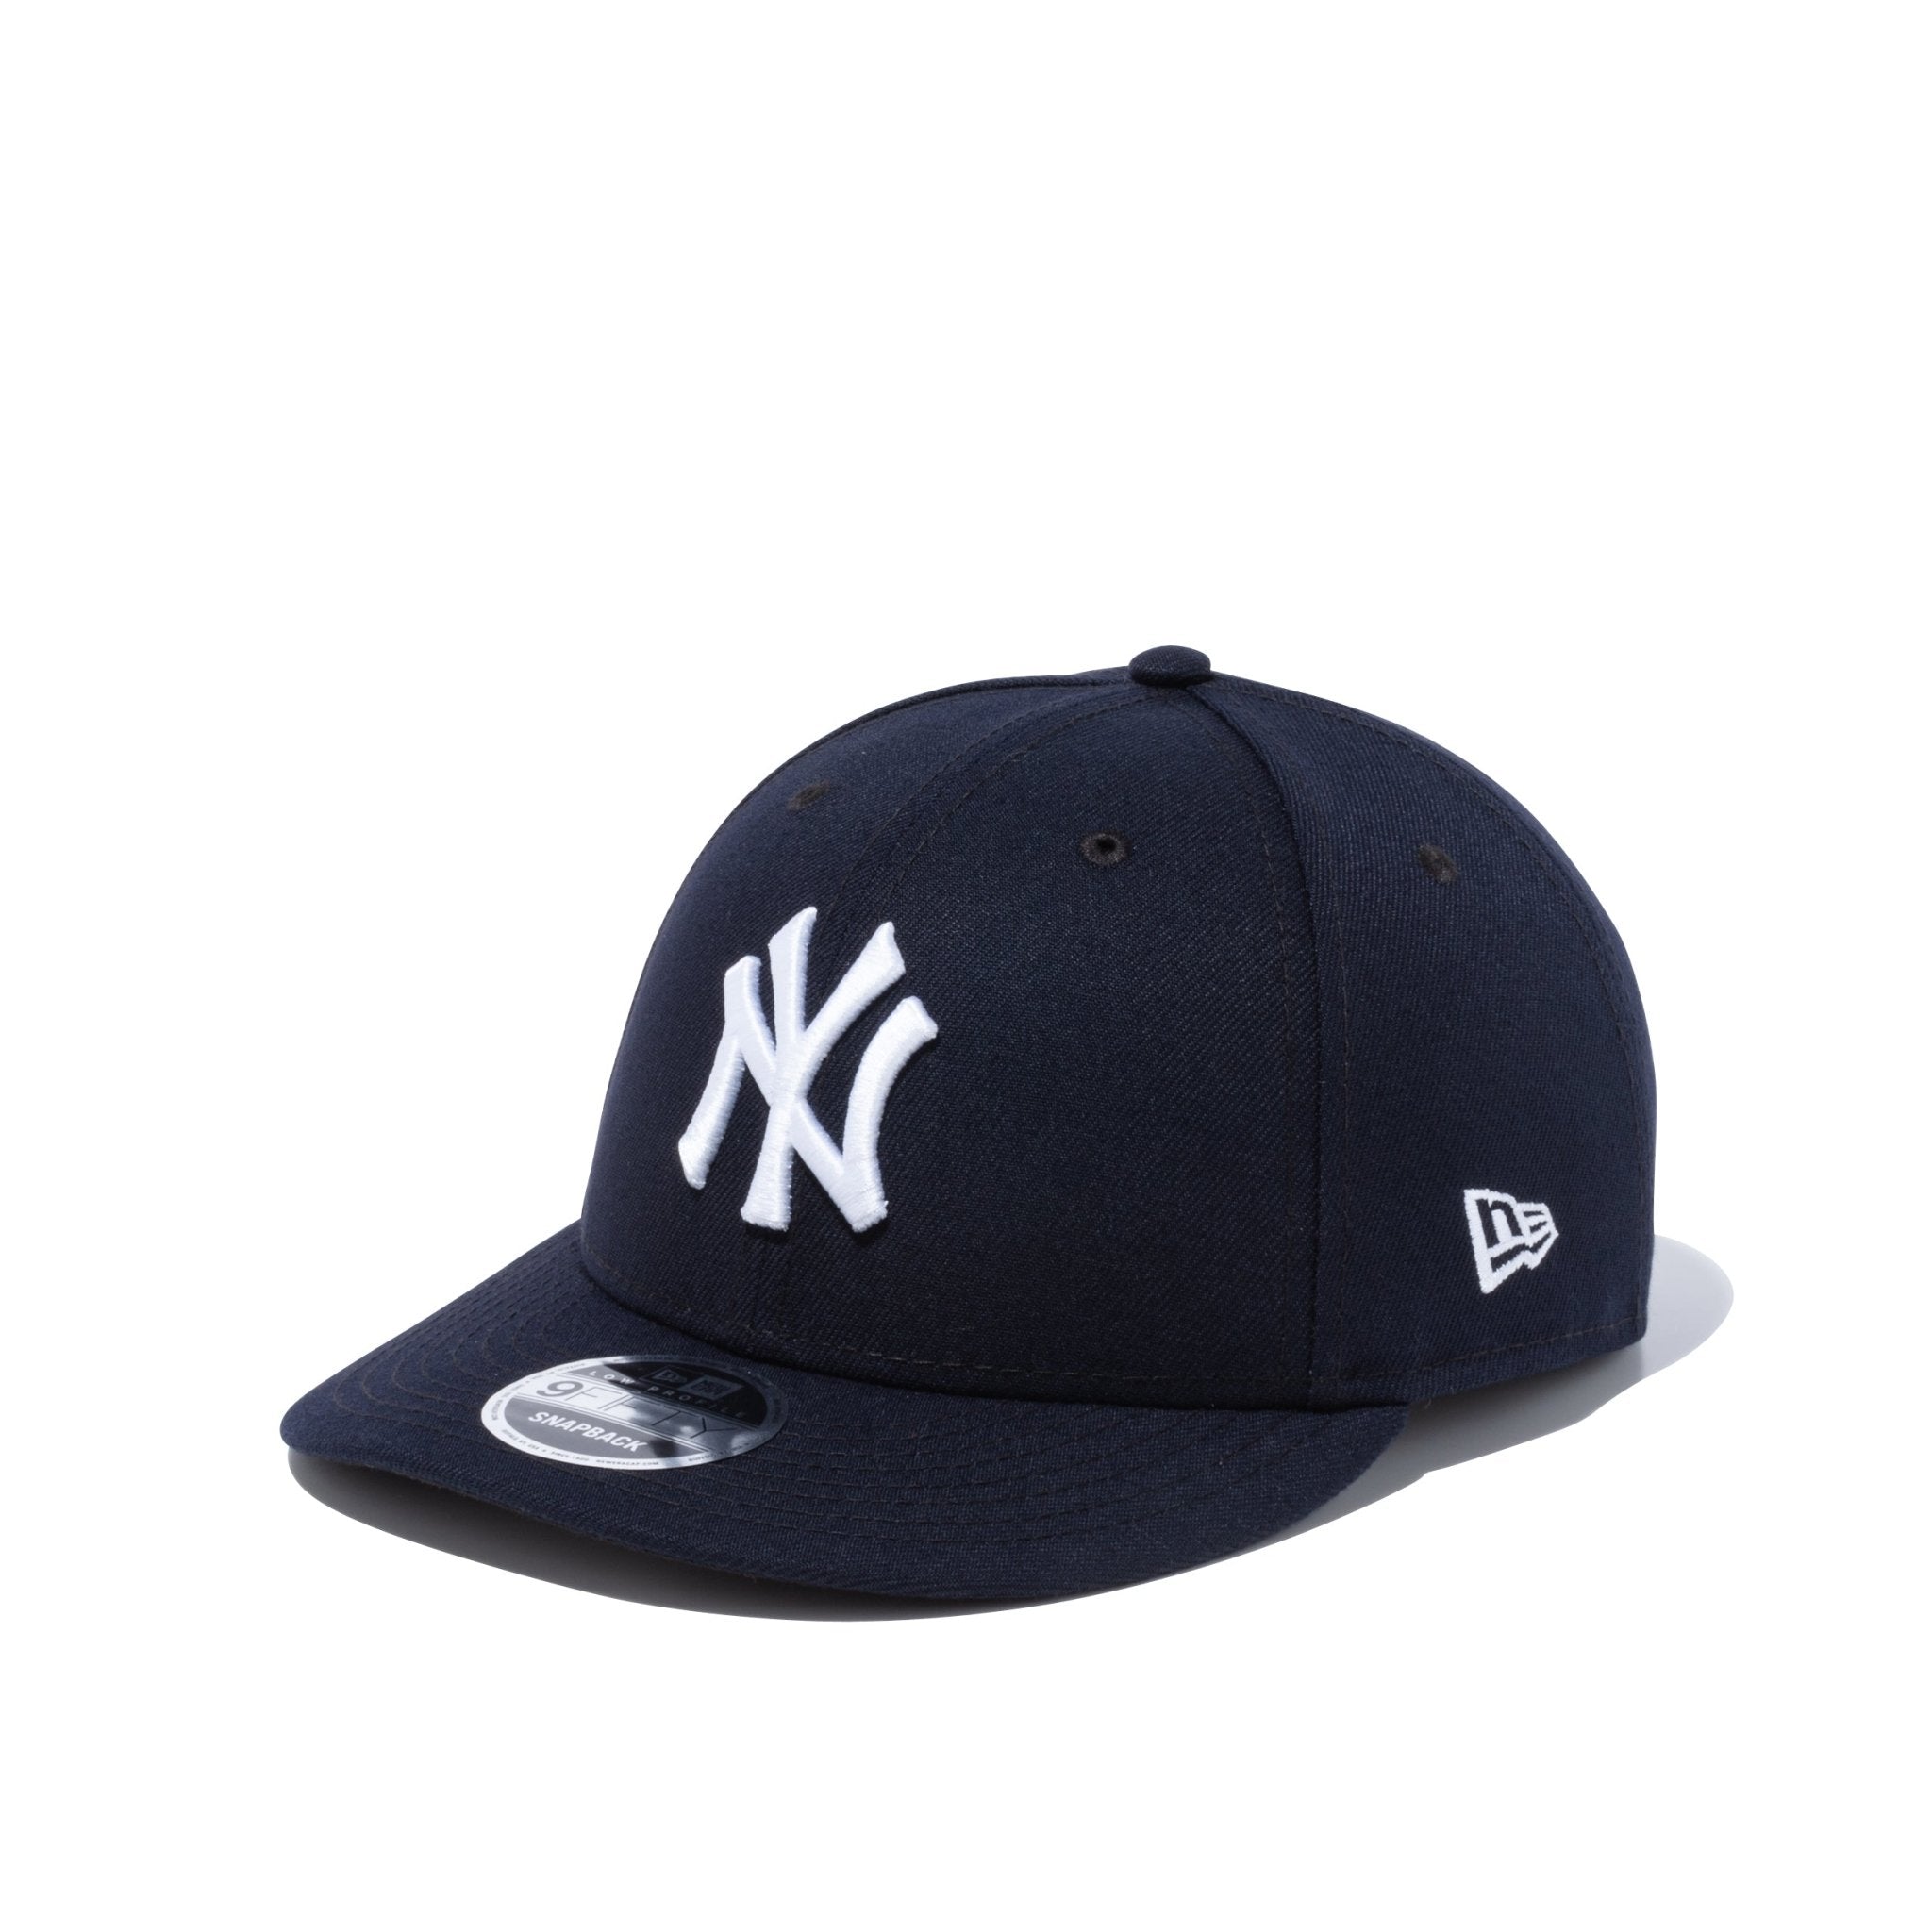 WTAPS / NEWERA】 59FIFTY LOW PROFILE S | kensysgas.com